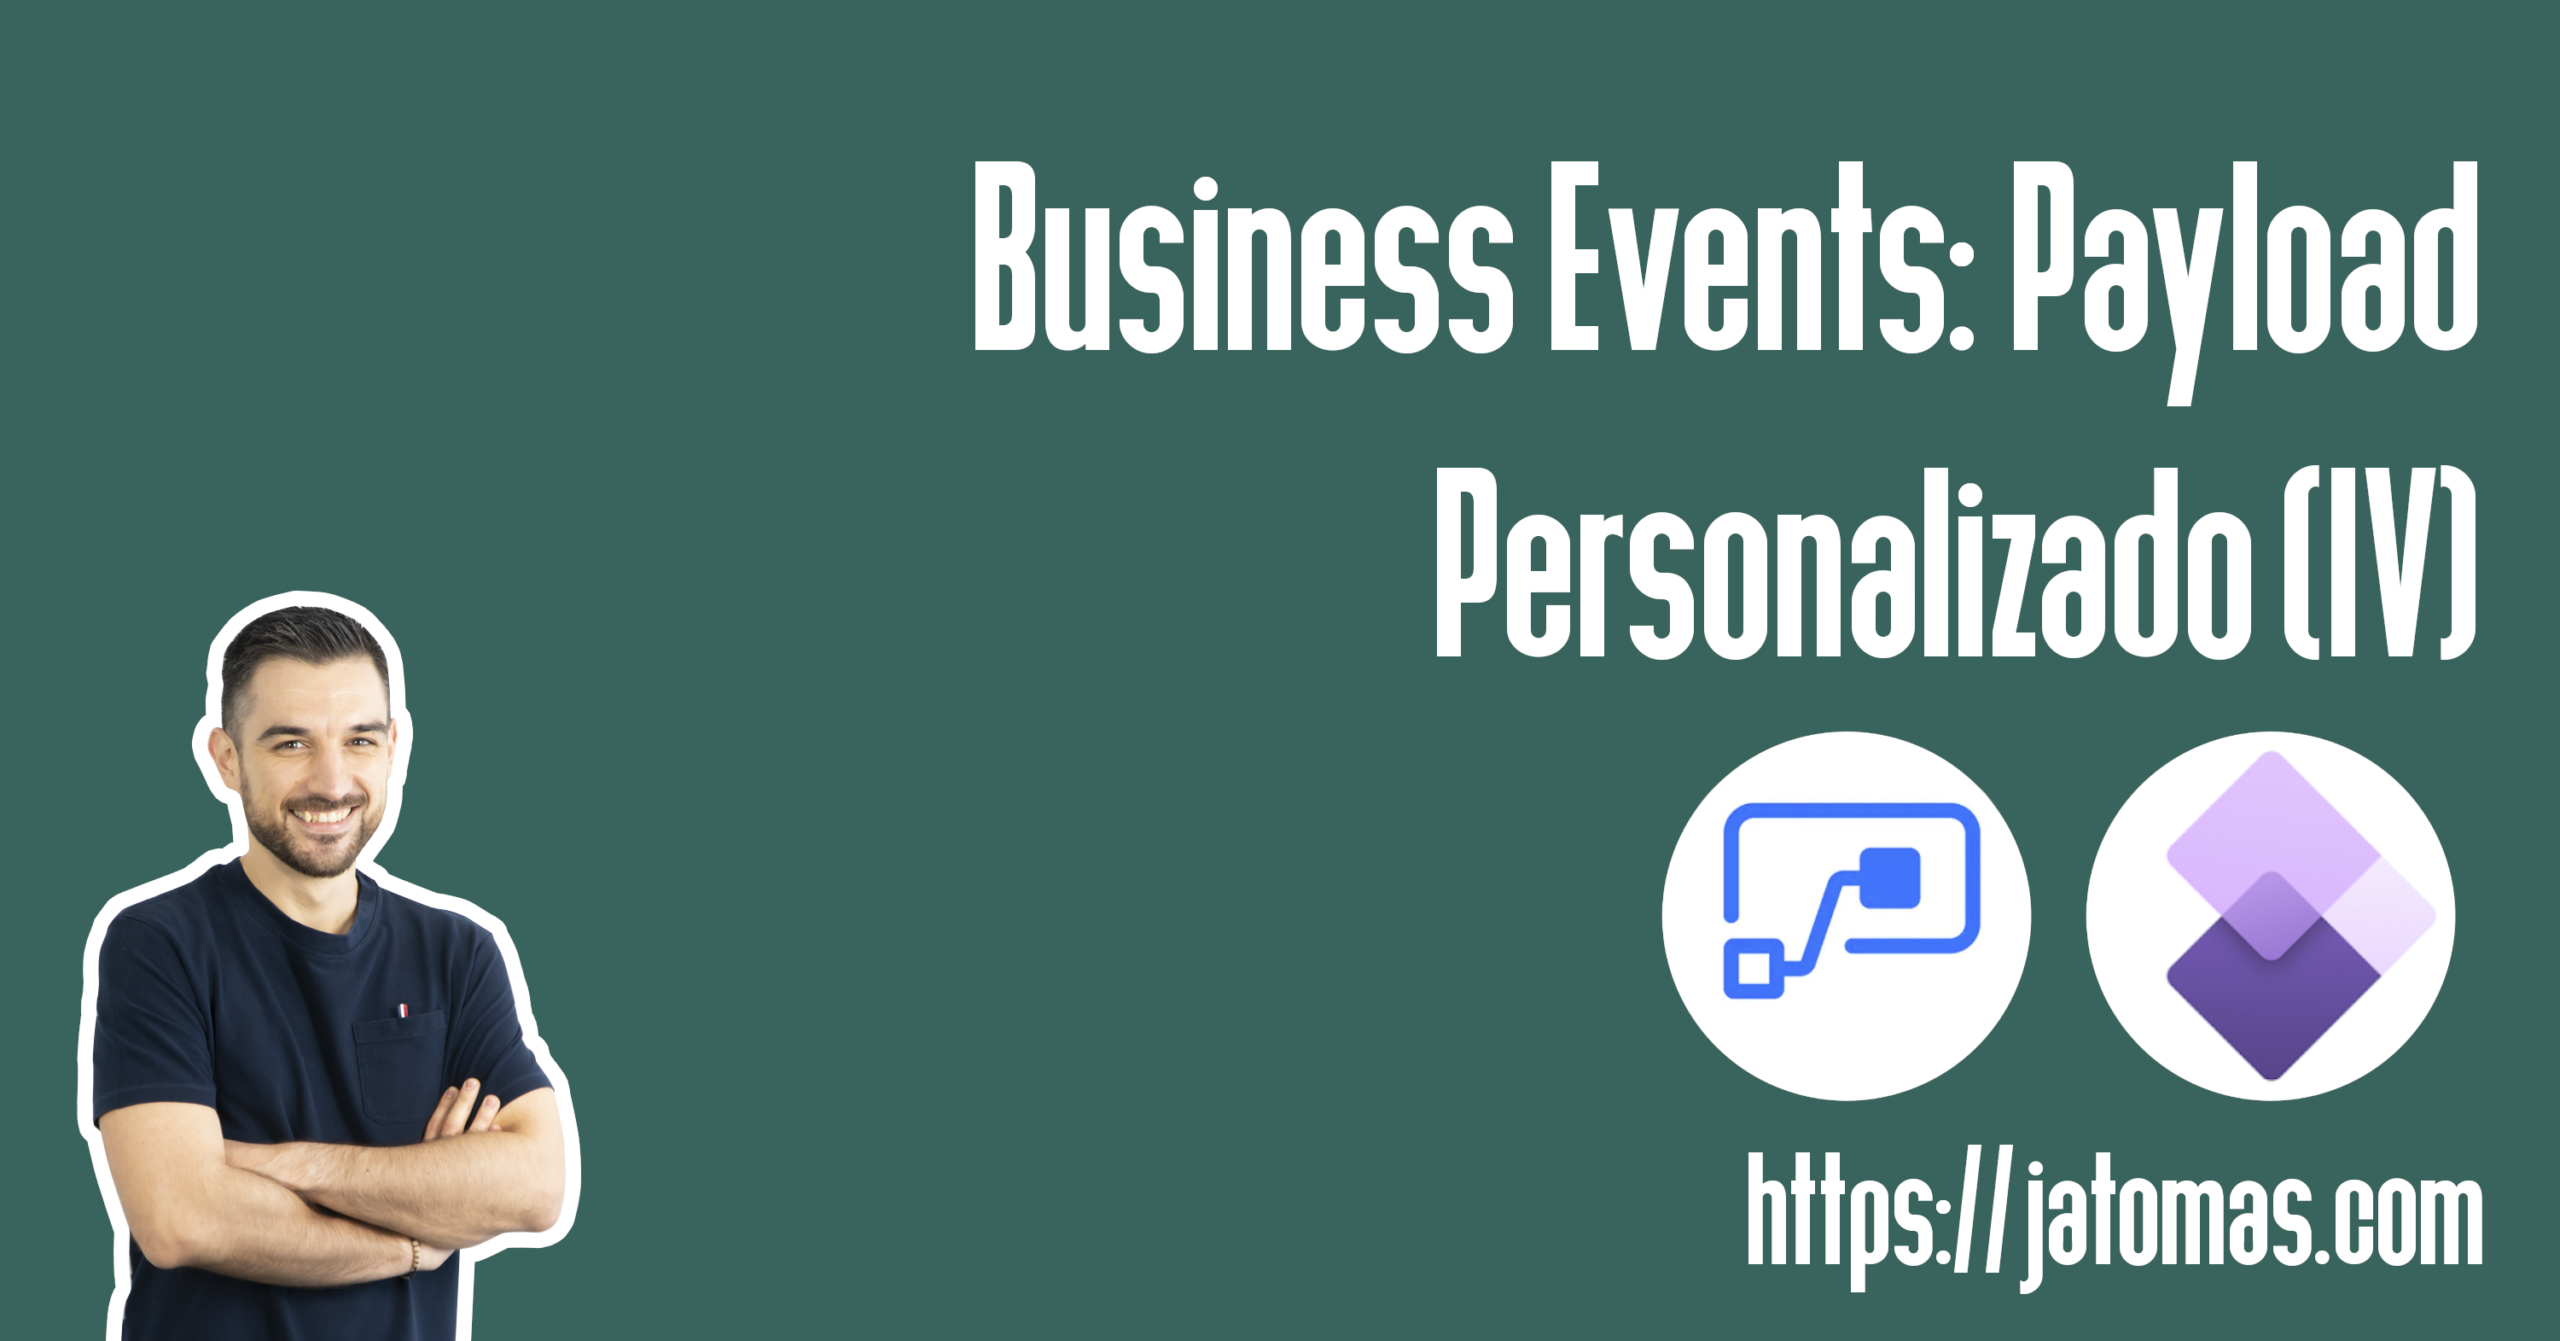 Business Events: Payload personalizado (IV)